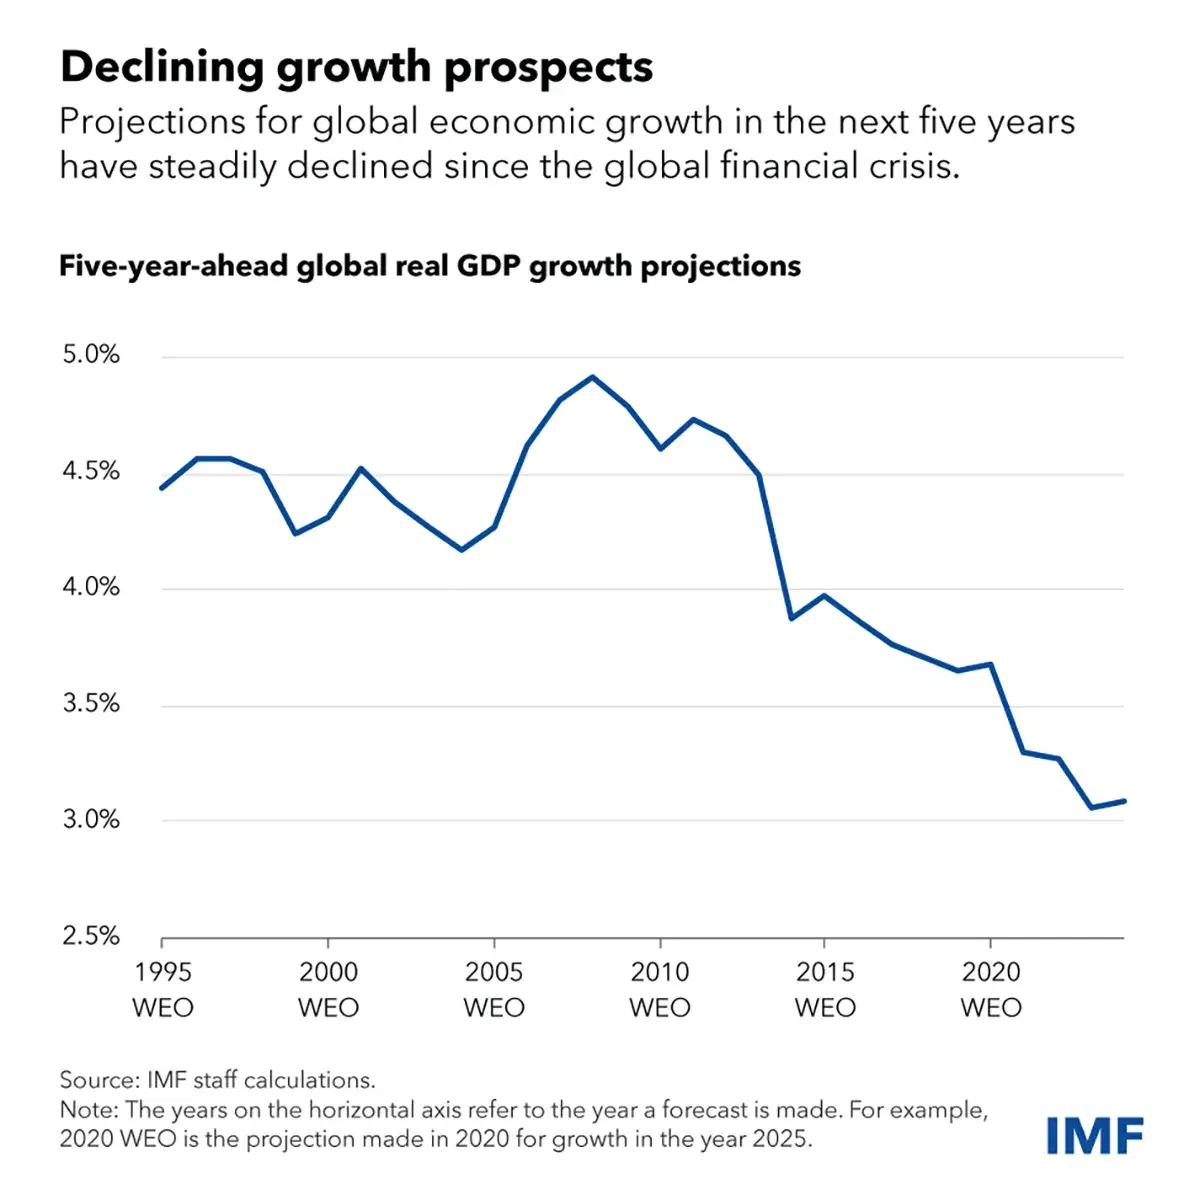 Global Growth Prospects are Declining